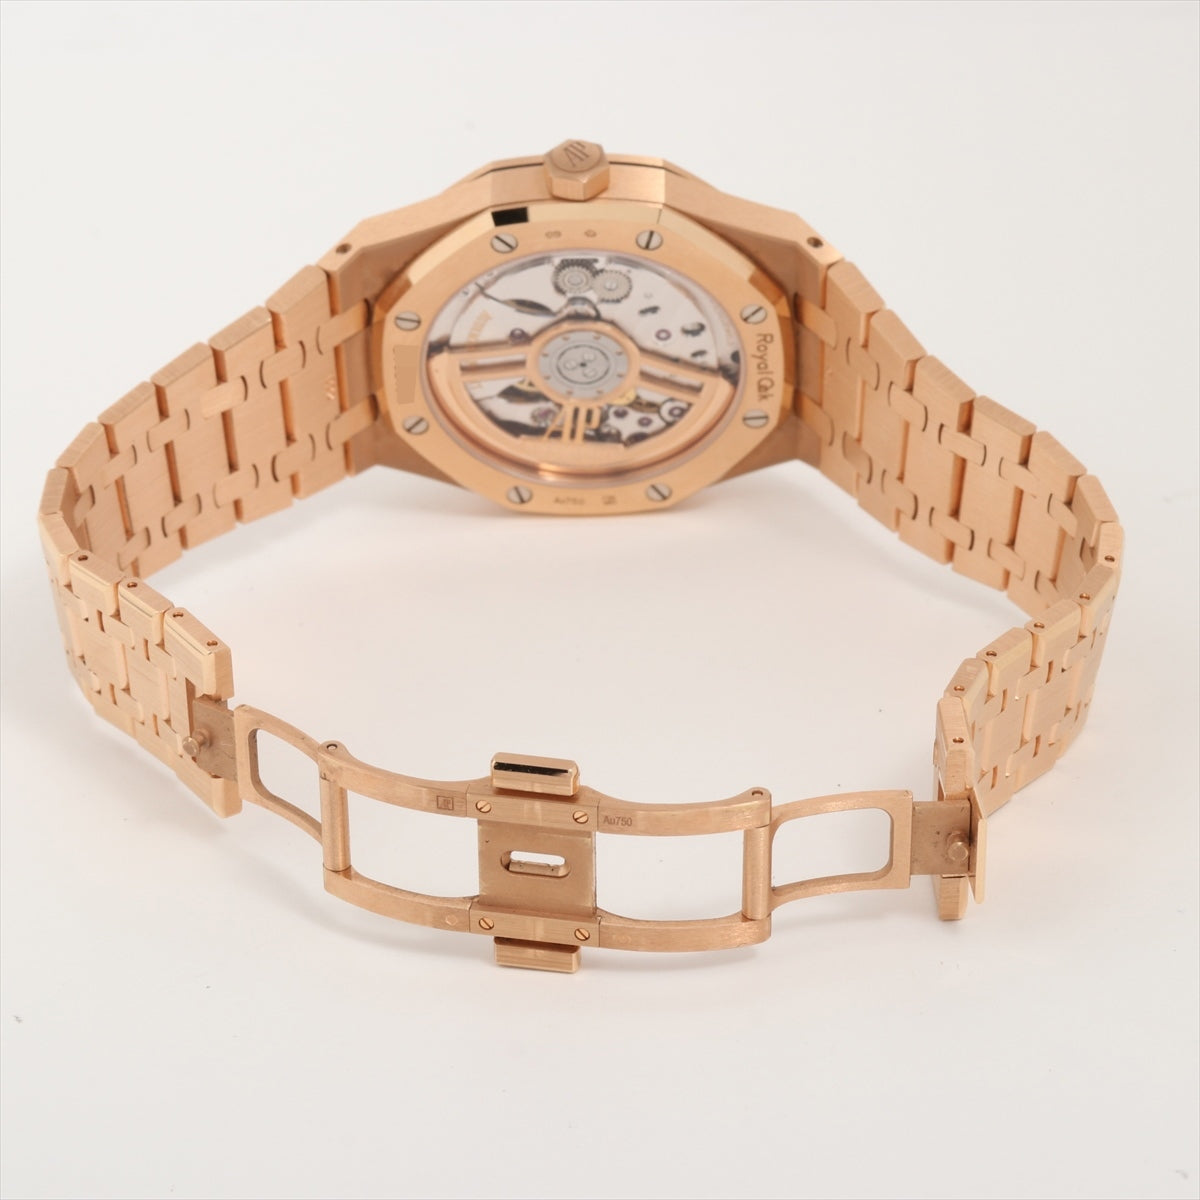 Audemars Piguet Royal Oak 15500OR.OO.1220OR.01 PG AT Black-Face Extra Link 1 Comes with a separate model box